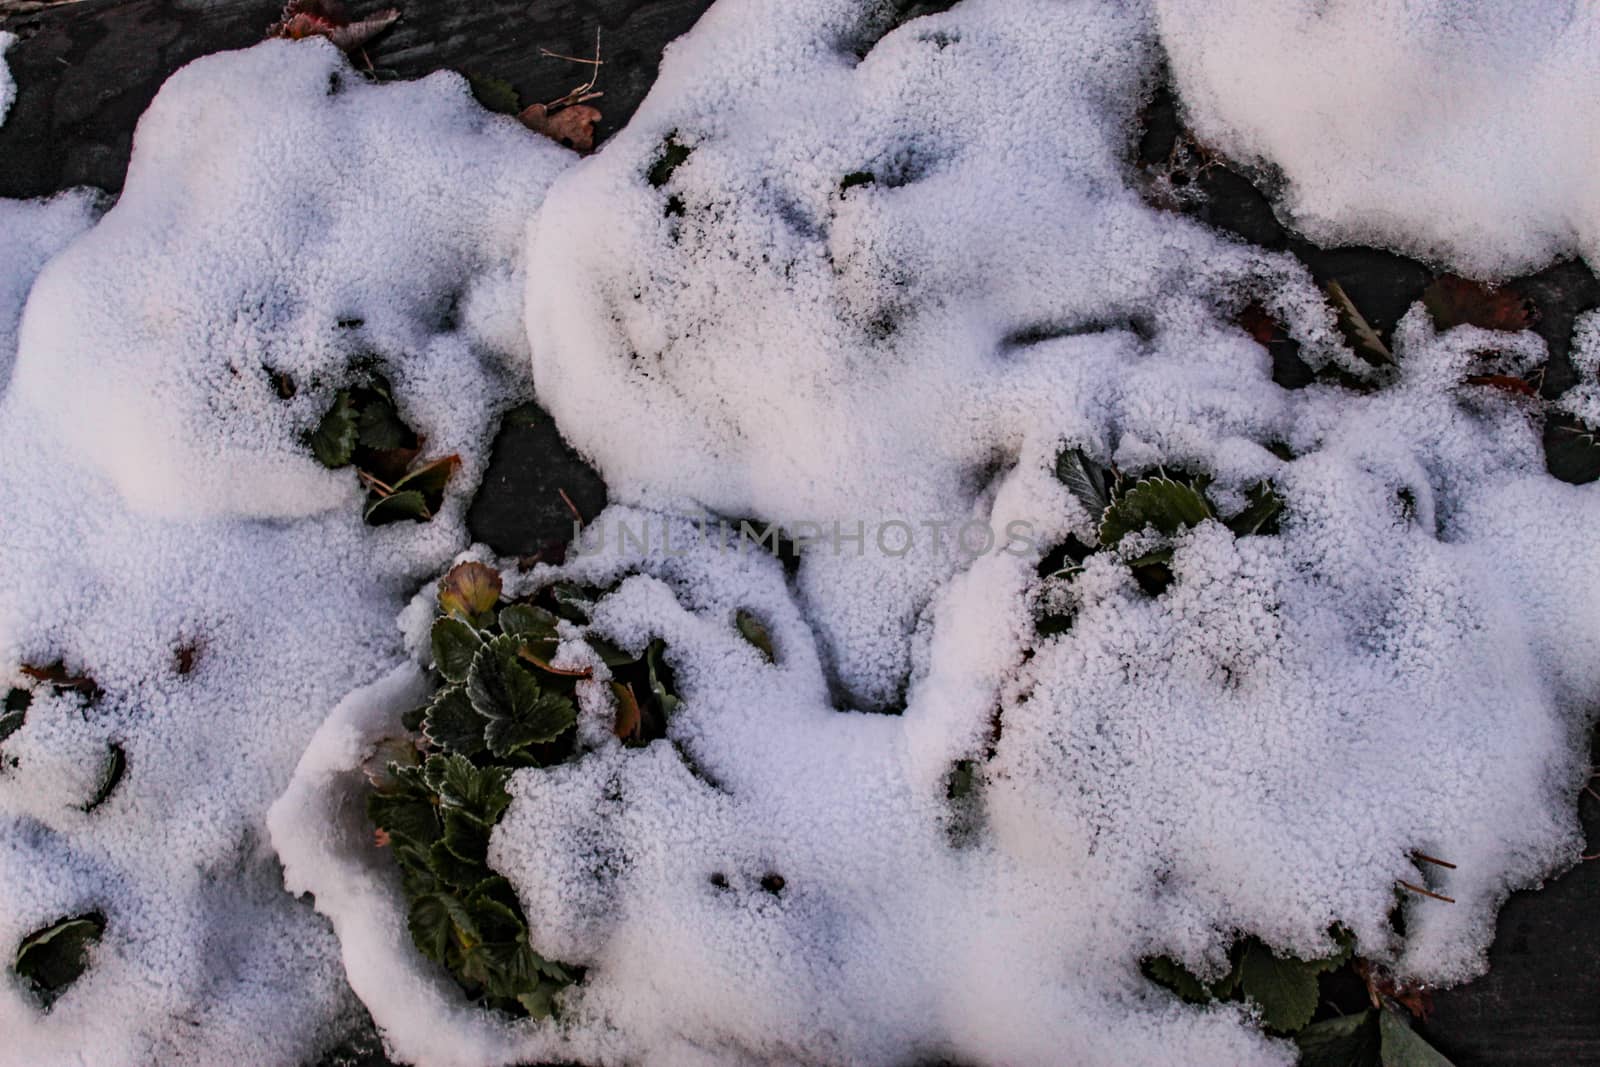 Snow fell on strawberry plants. A snow-covered strawberry plant, some strawberry leaves protruding above the snow in rows. Zavidovici, Bosnia and Herzegovina.